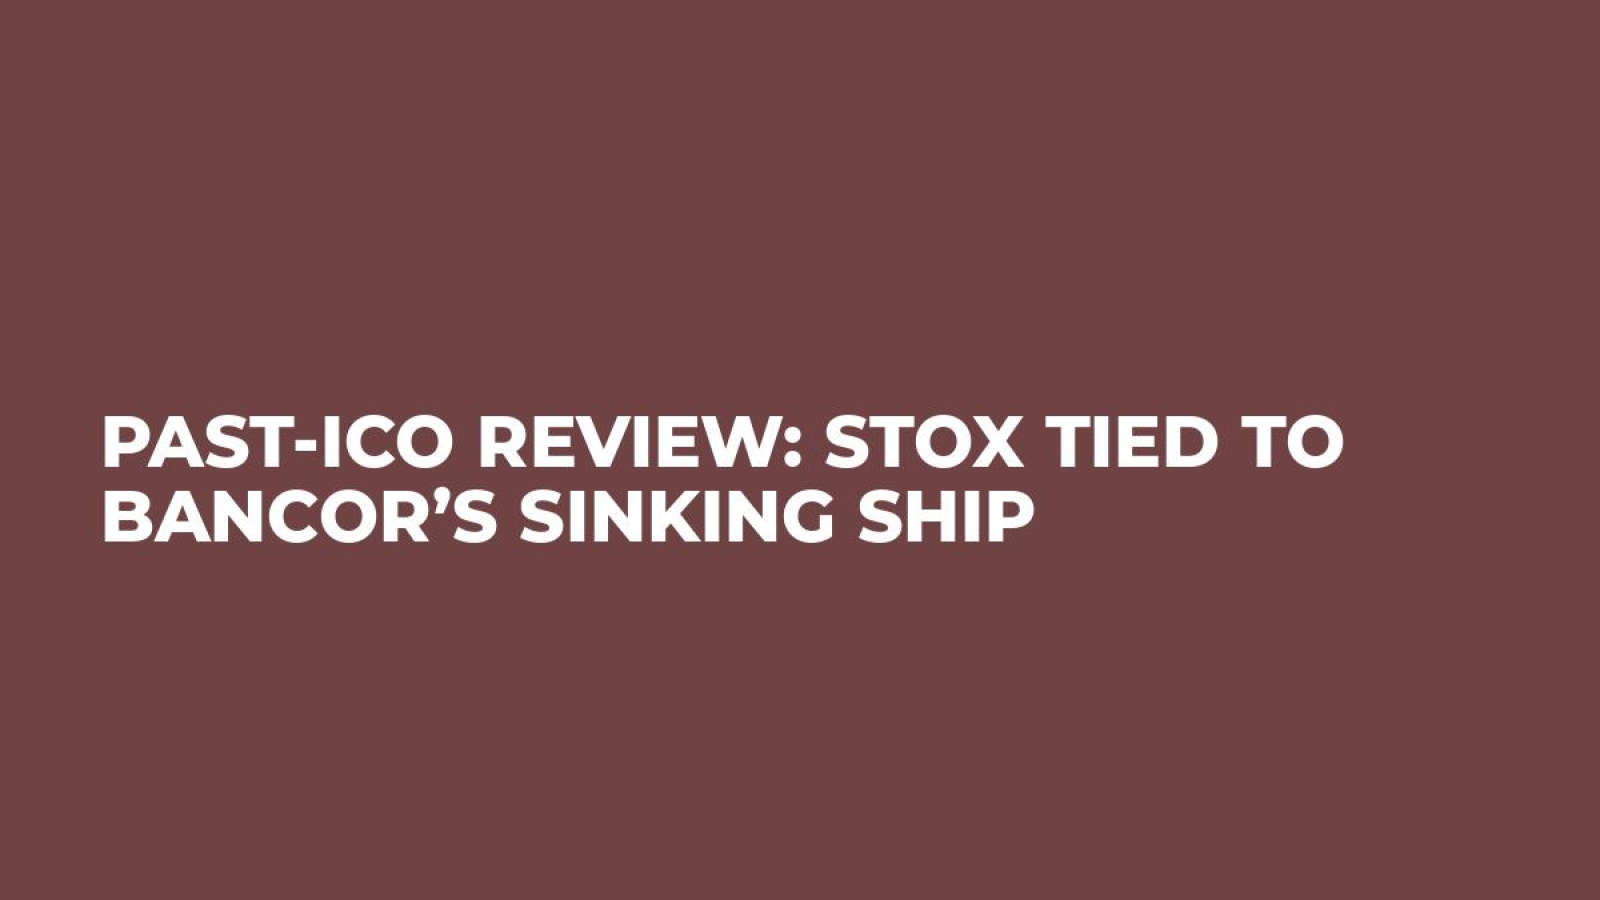 Past-ICO Review: Stox Tied to Bancor’s Sinking Ship